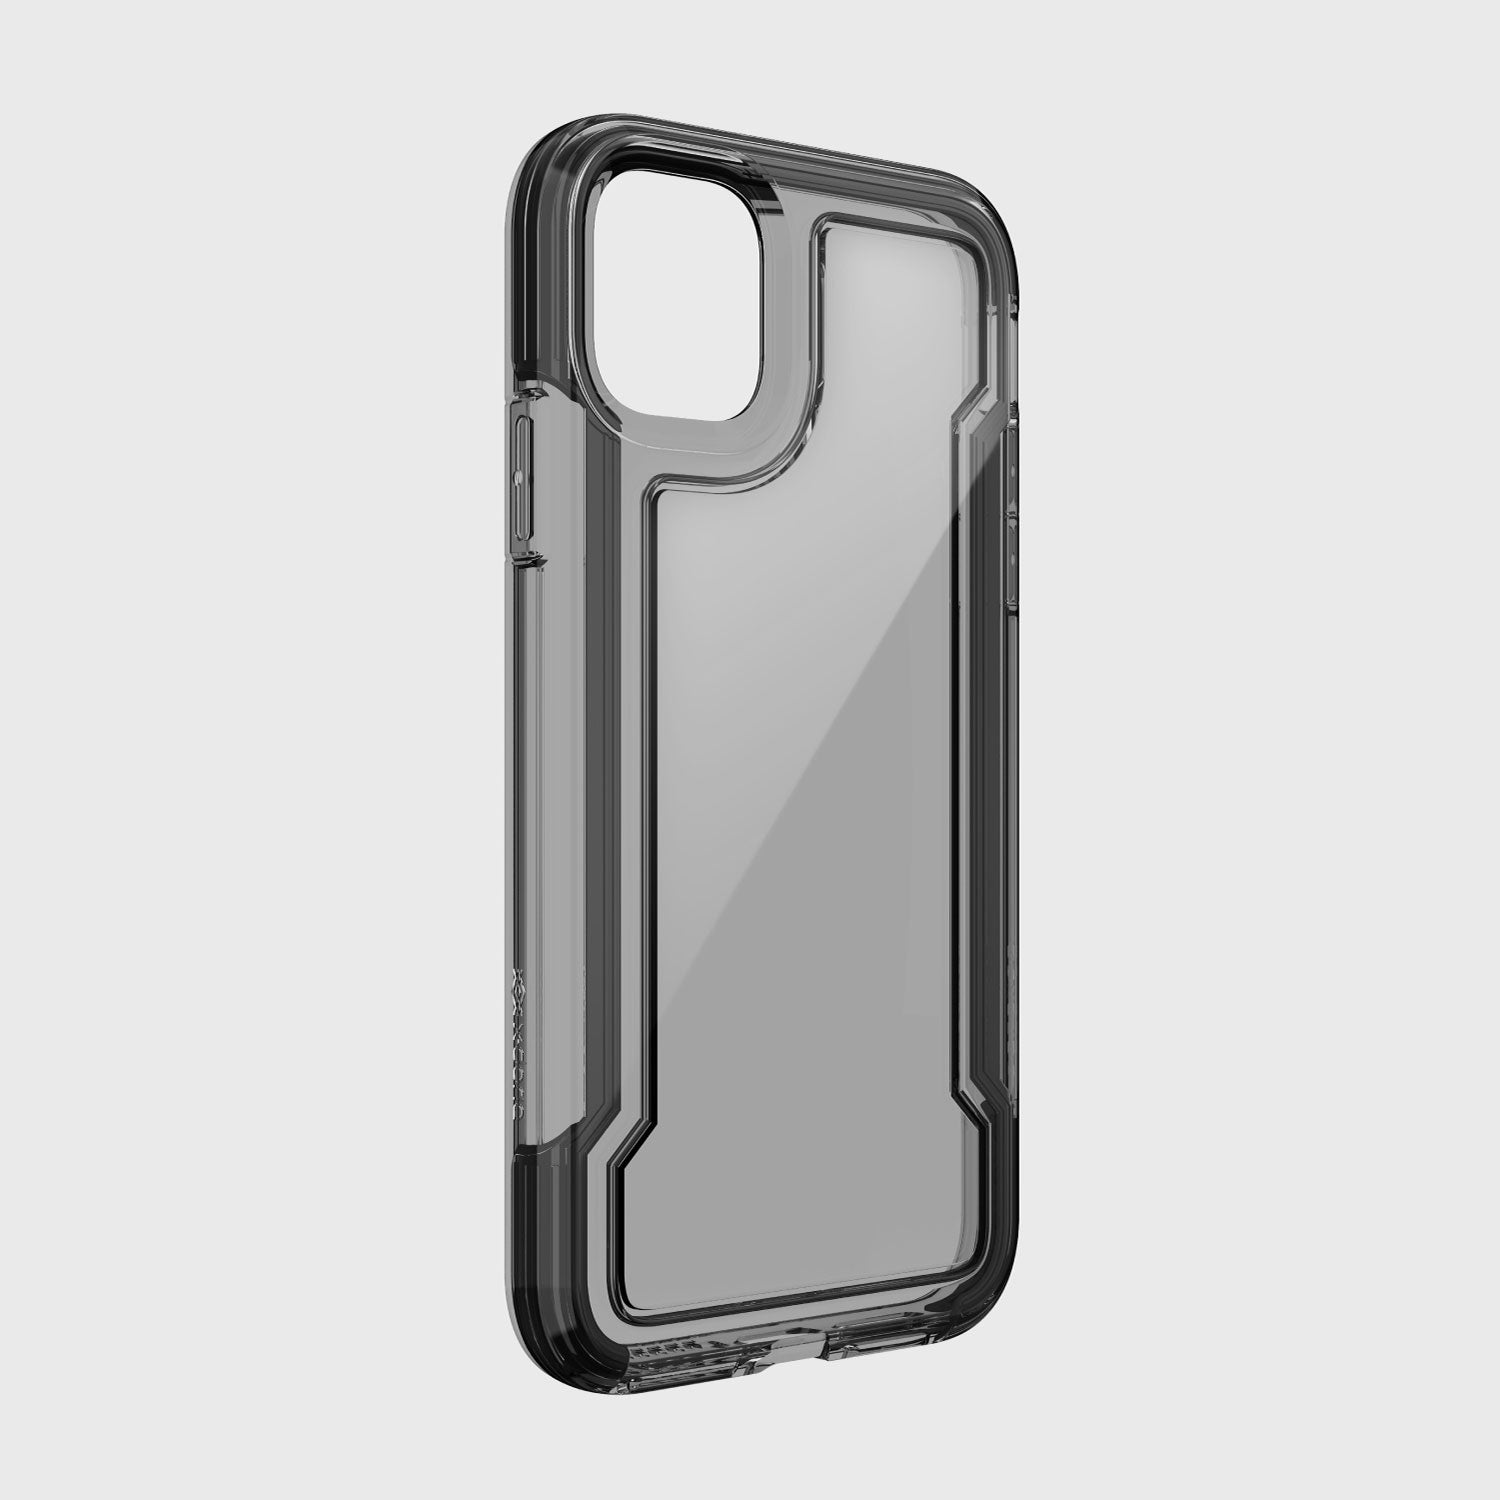 The back of the Raptic iPhone 11 Case - CLEAR is shown, featuring shock-absorbing rubber for 2-metre drop protection.